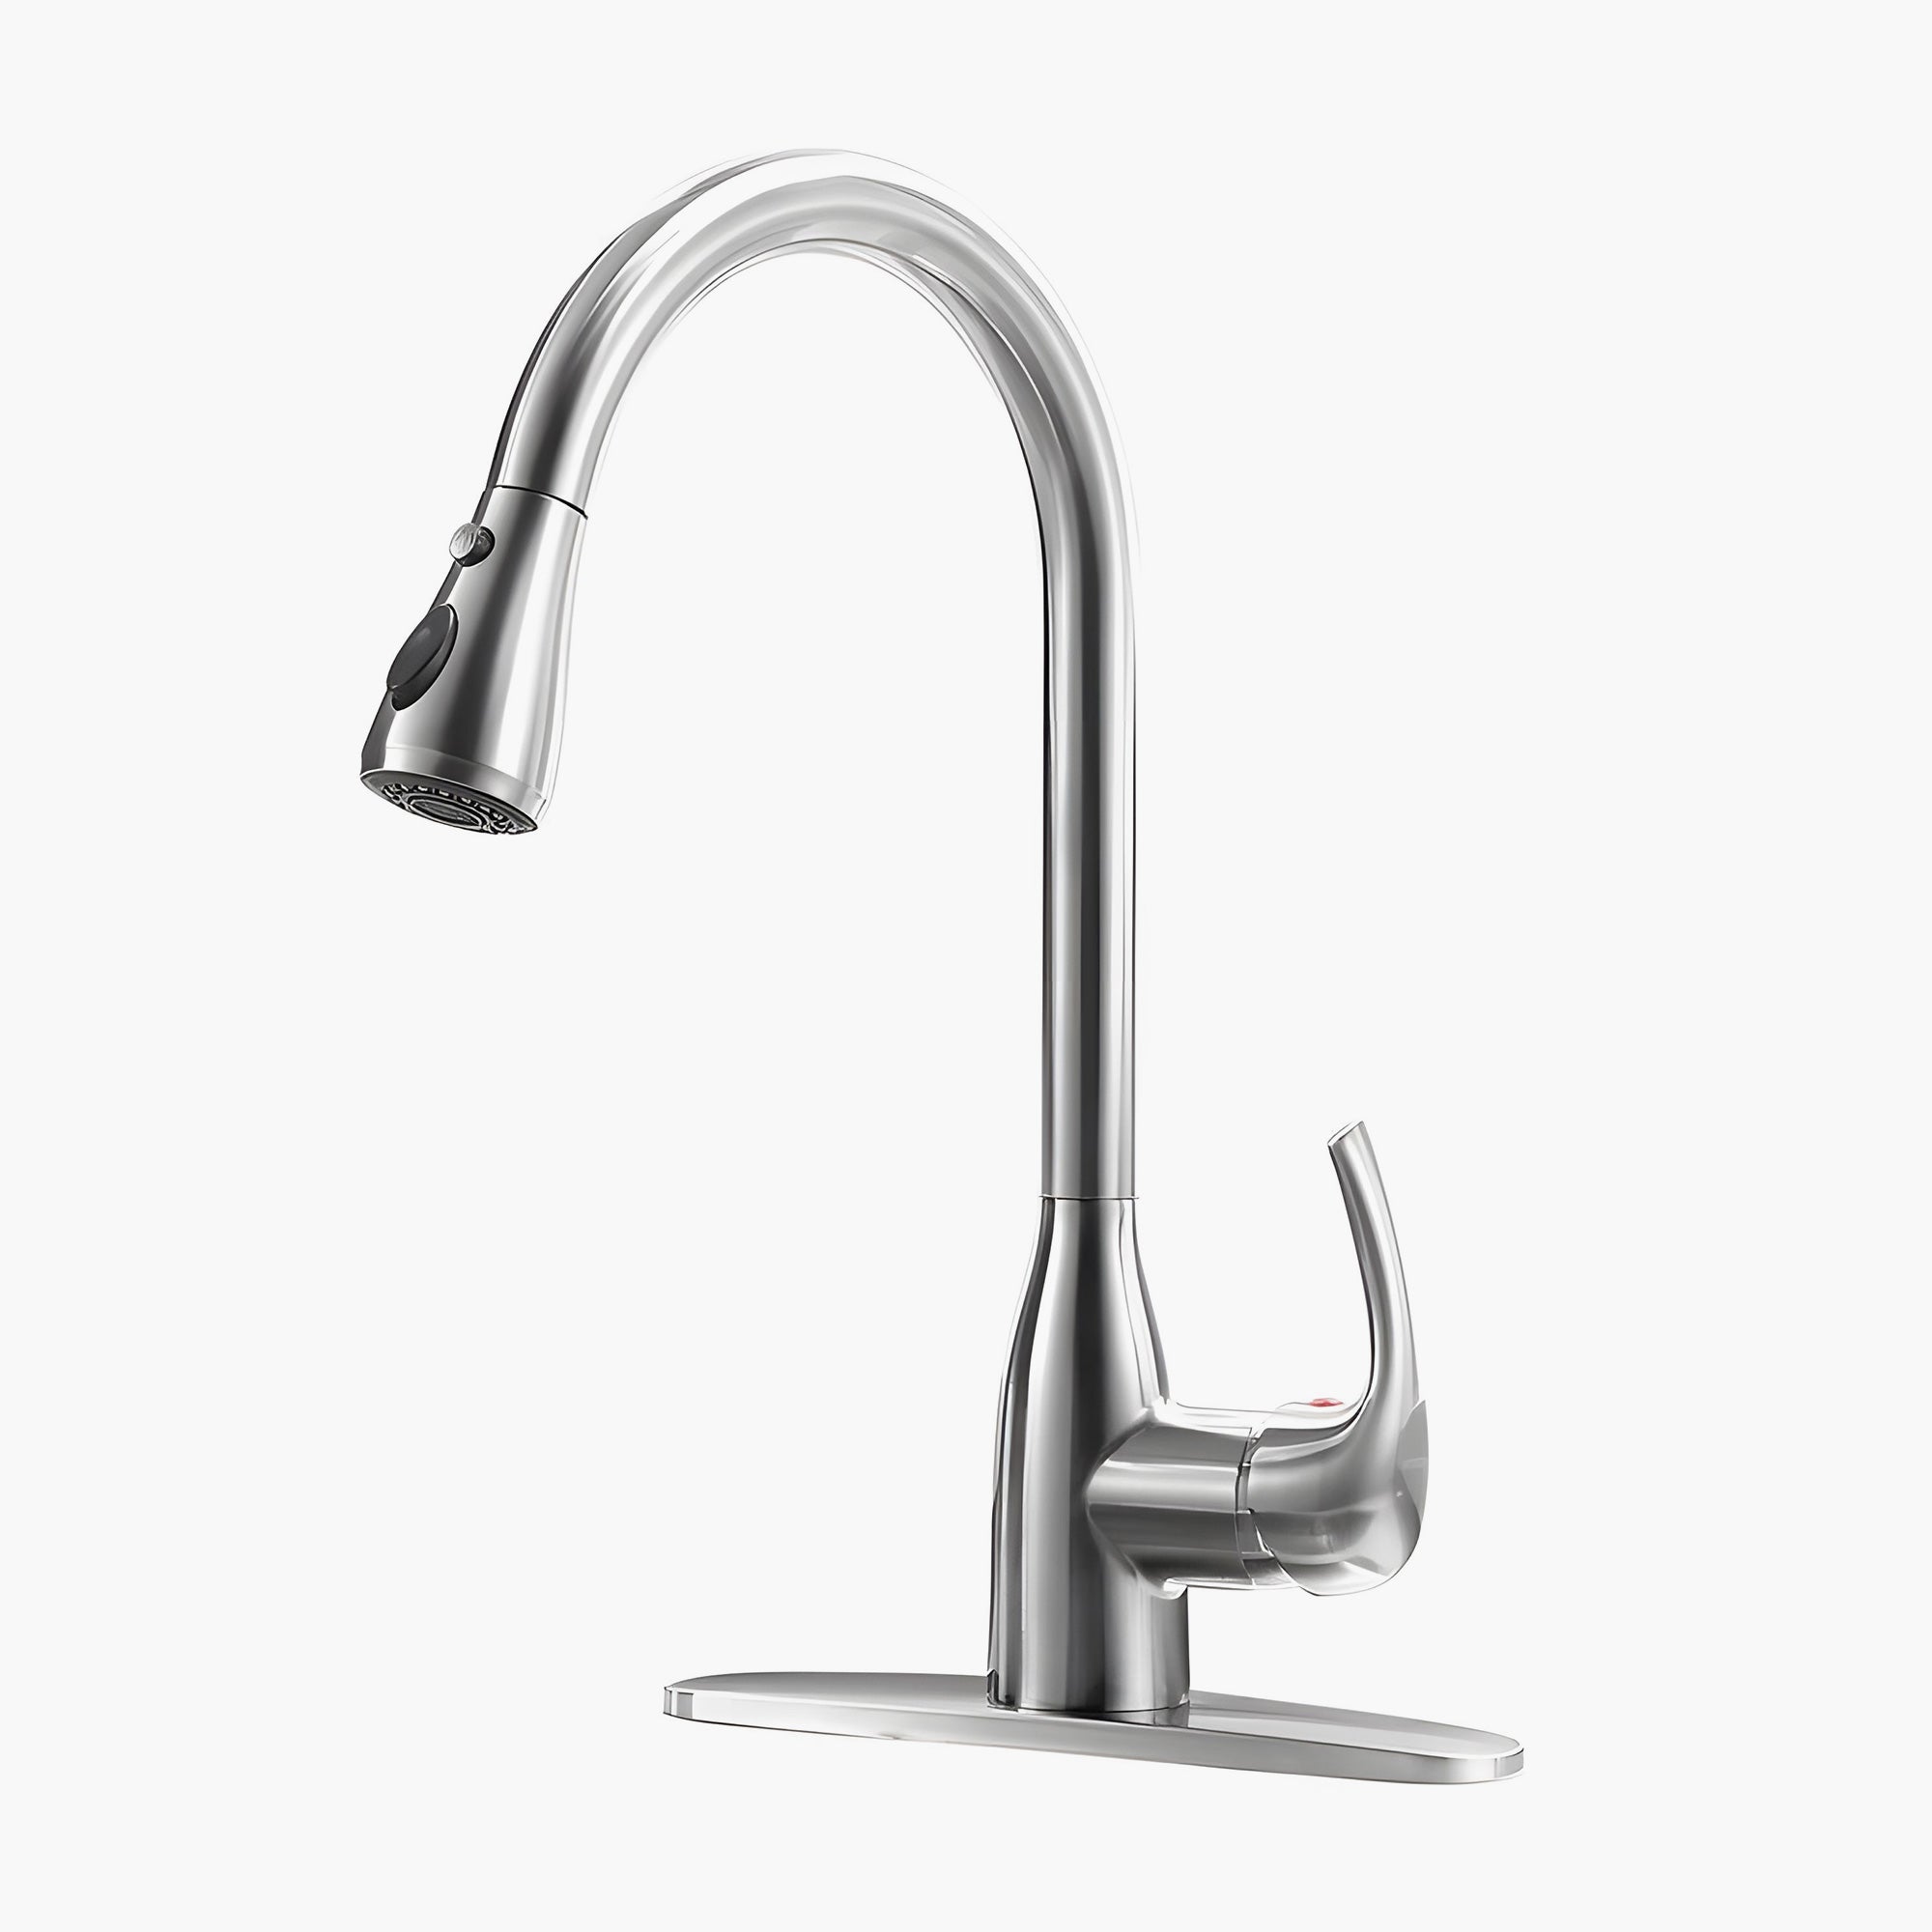 HOROW Single Handle Kitchen Faucet With Pull Out Spray Model HR-KF0135B